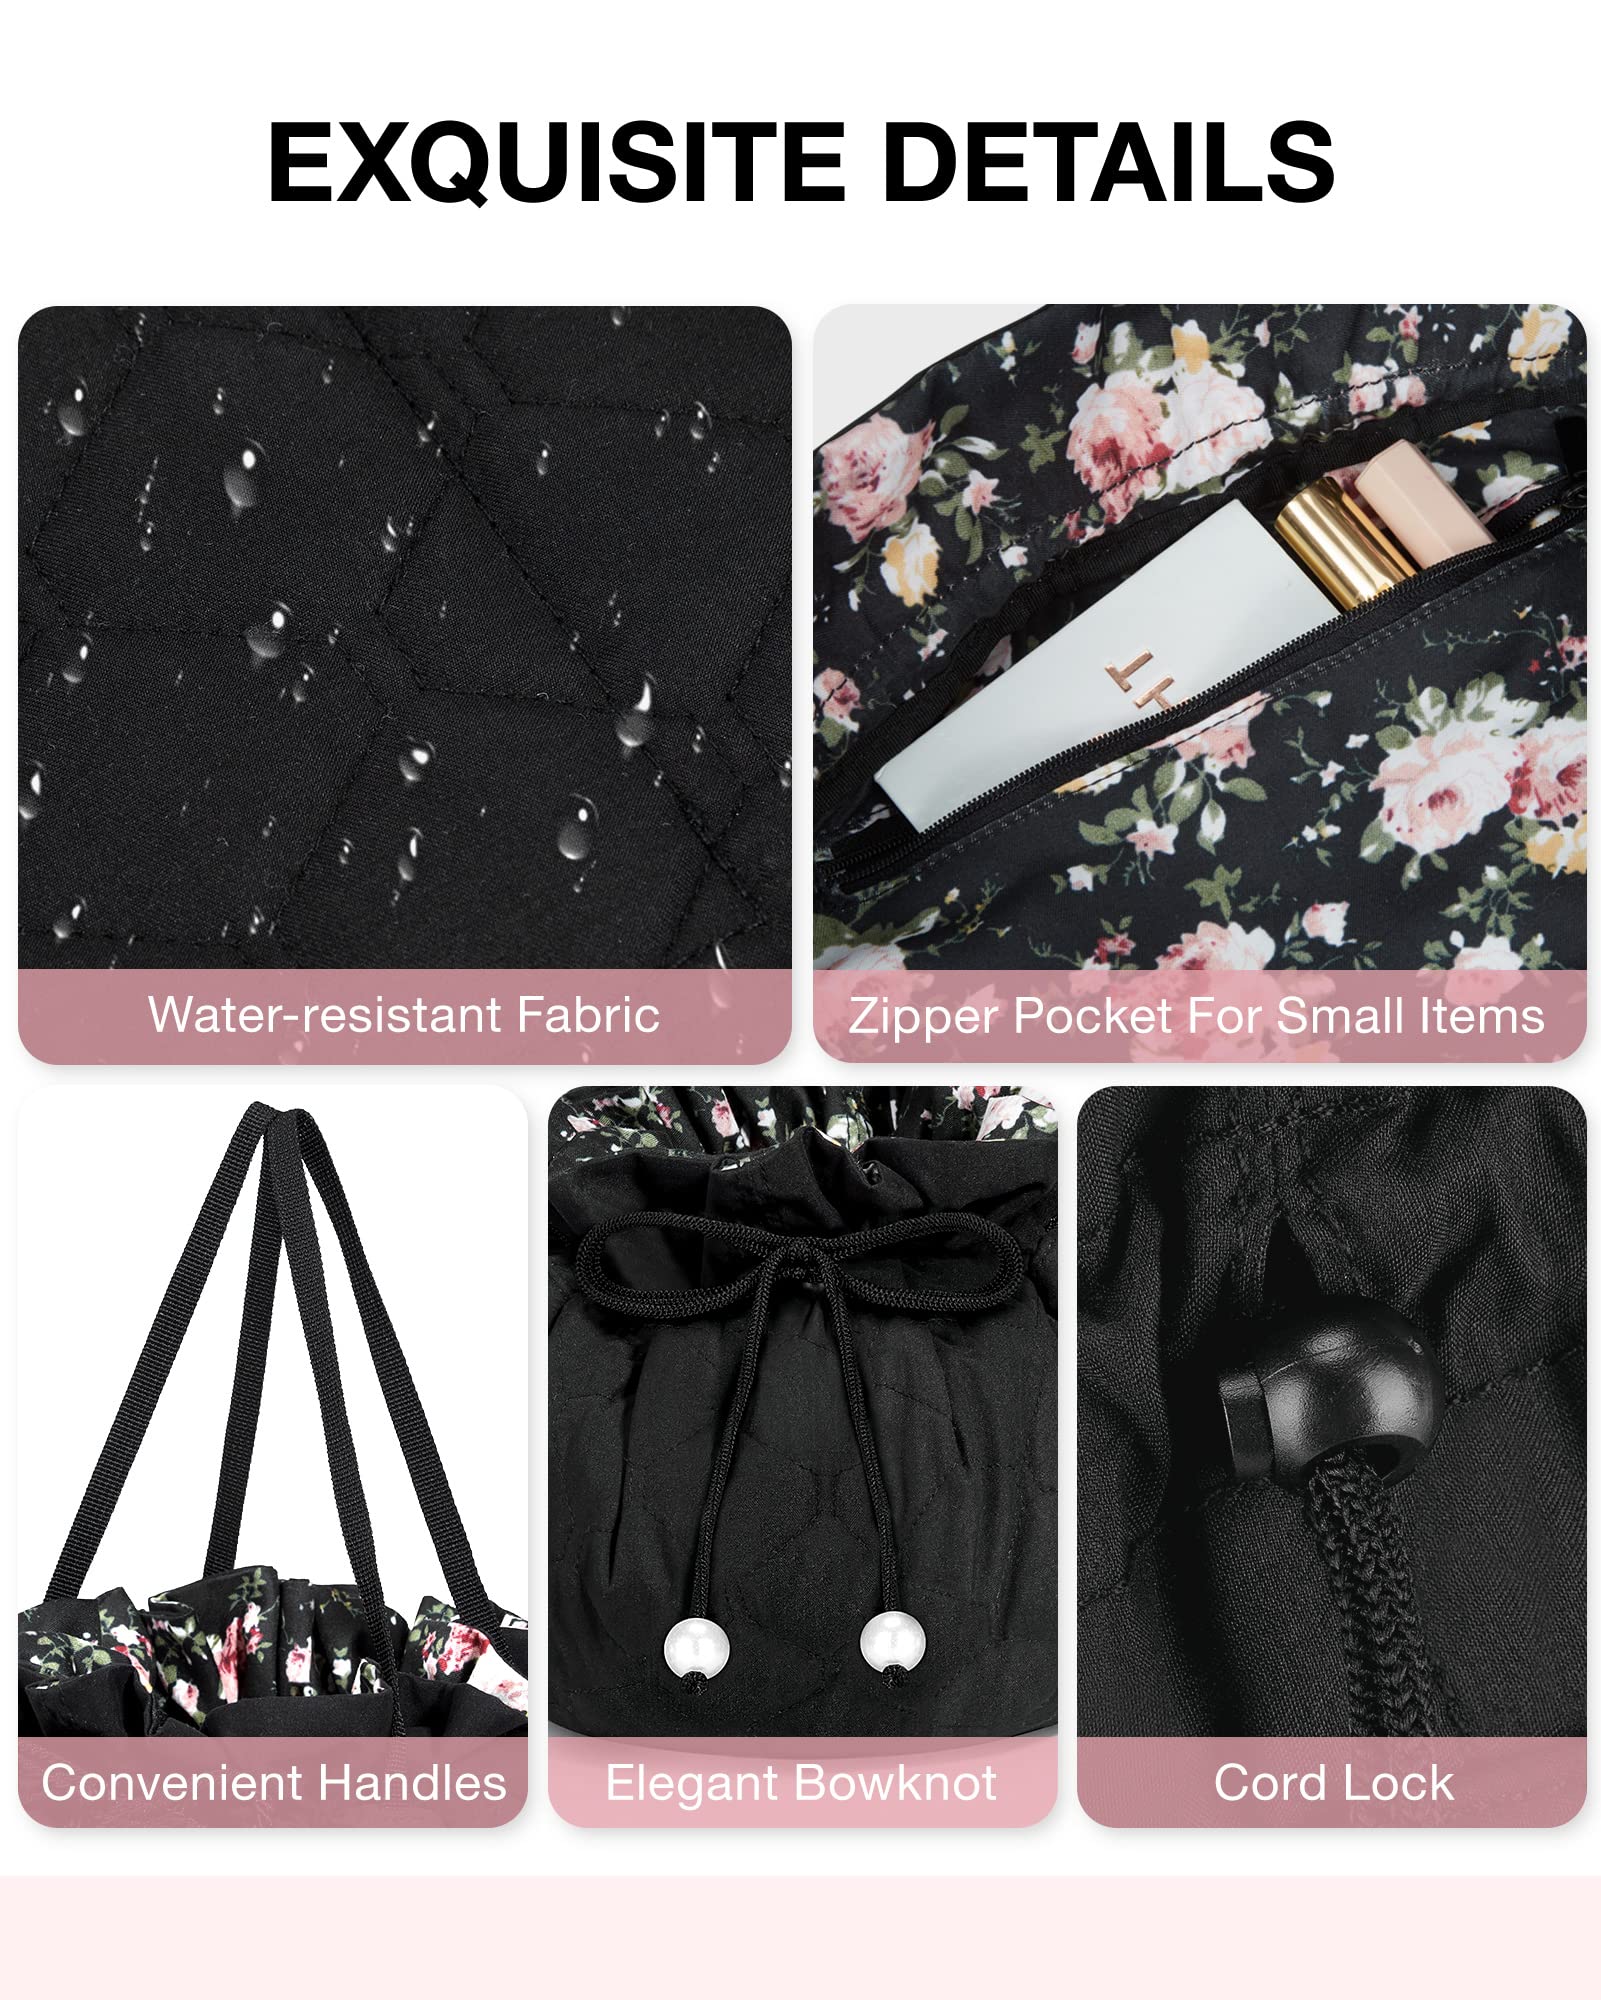 BAGSMART Drawstring Makeup Bag, Cosmetic Bag, Travel Makeup Organizer Case with Clear Pouch Set, Make Up Bags for Women Portable Toiletries Accessories Brush Floral (Black)